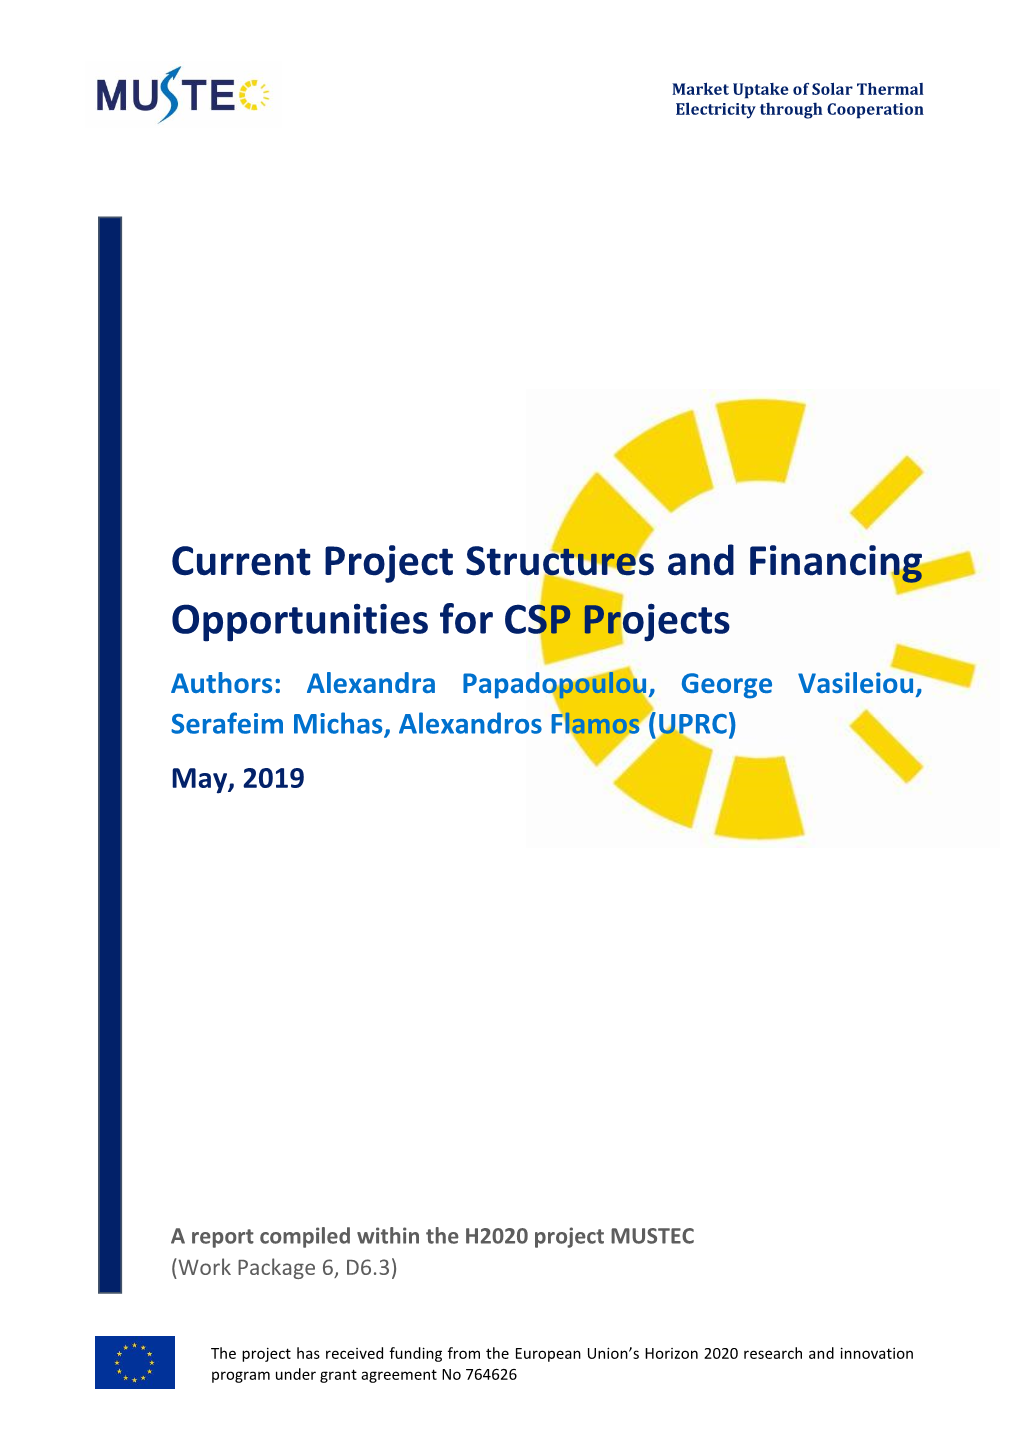 Current Project Structures and Financing Opportunities for CSP